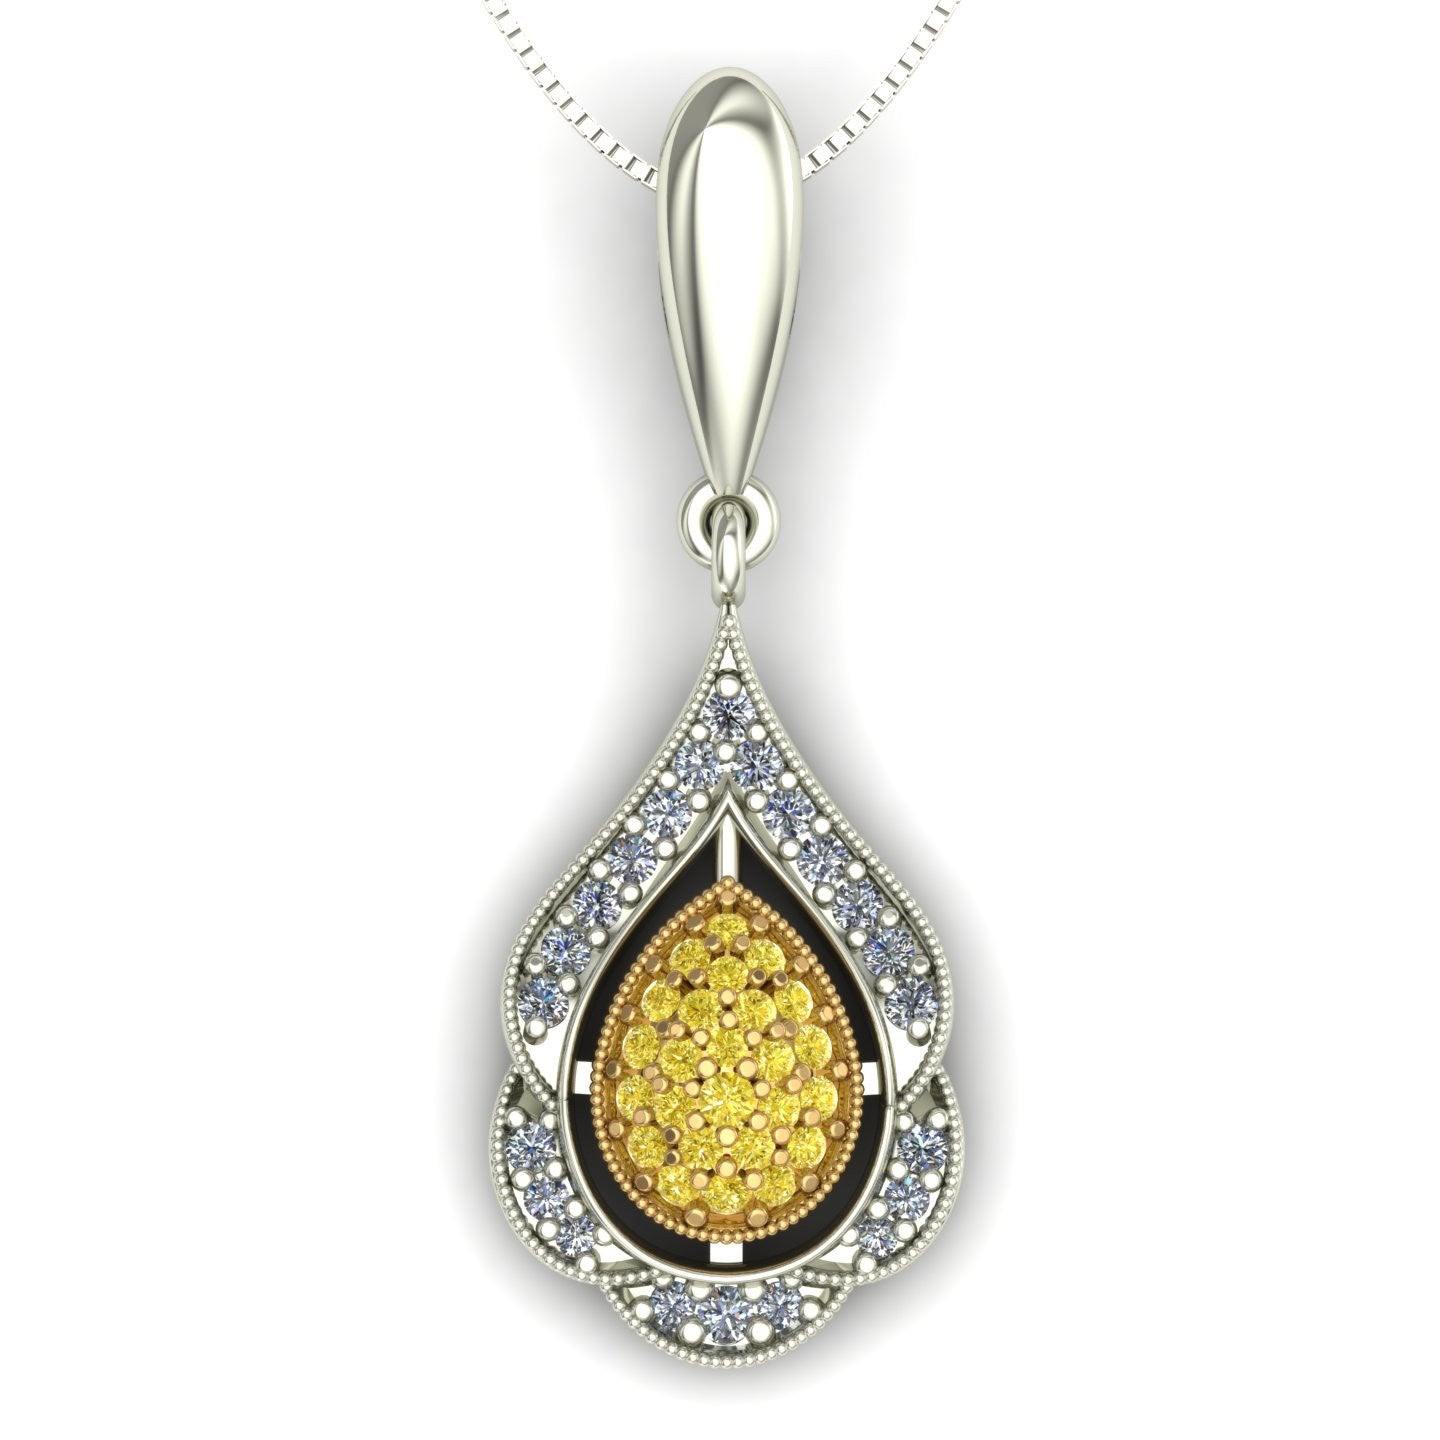 Yellow diamond pavé pendant in 14k yellow and white gold - Charles Babb Designs
 - 1